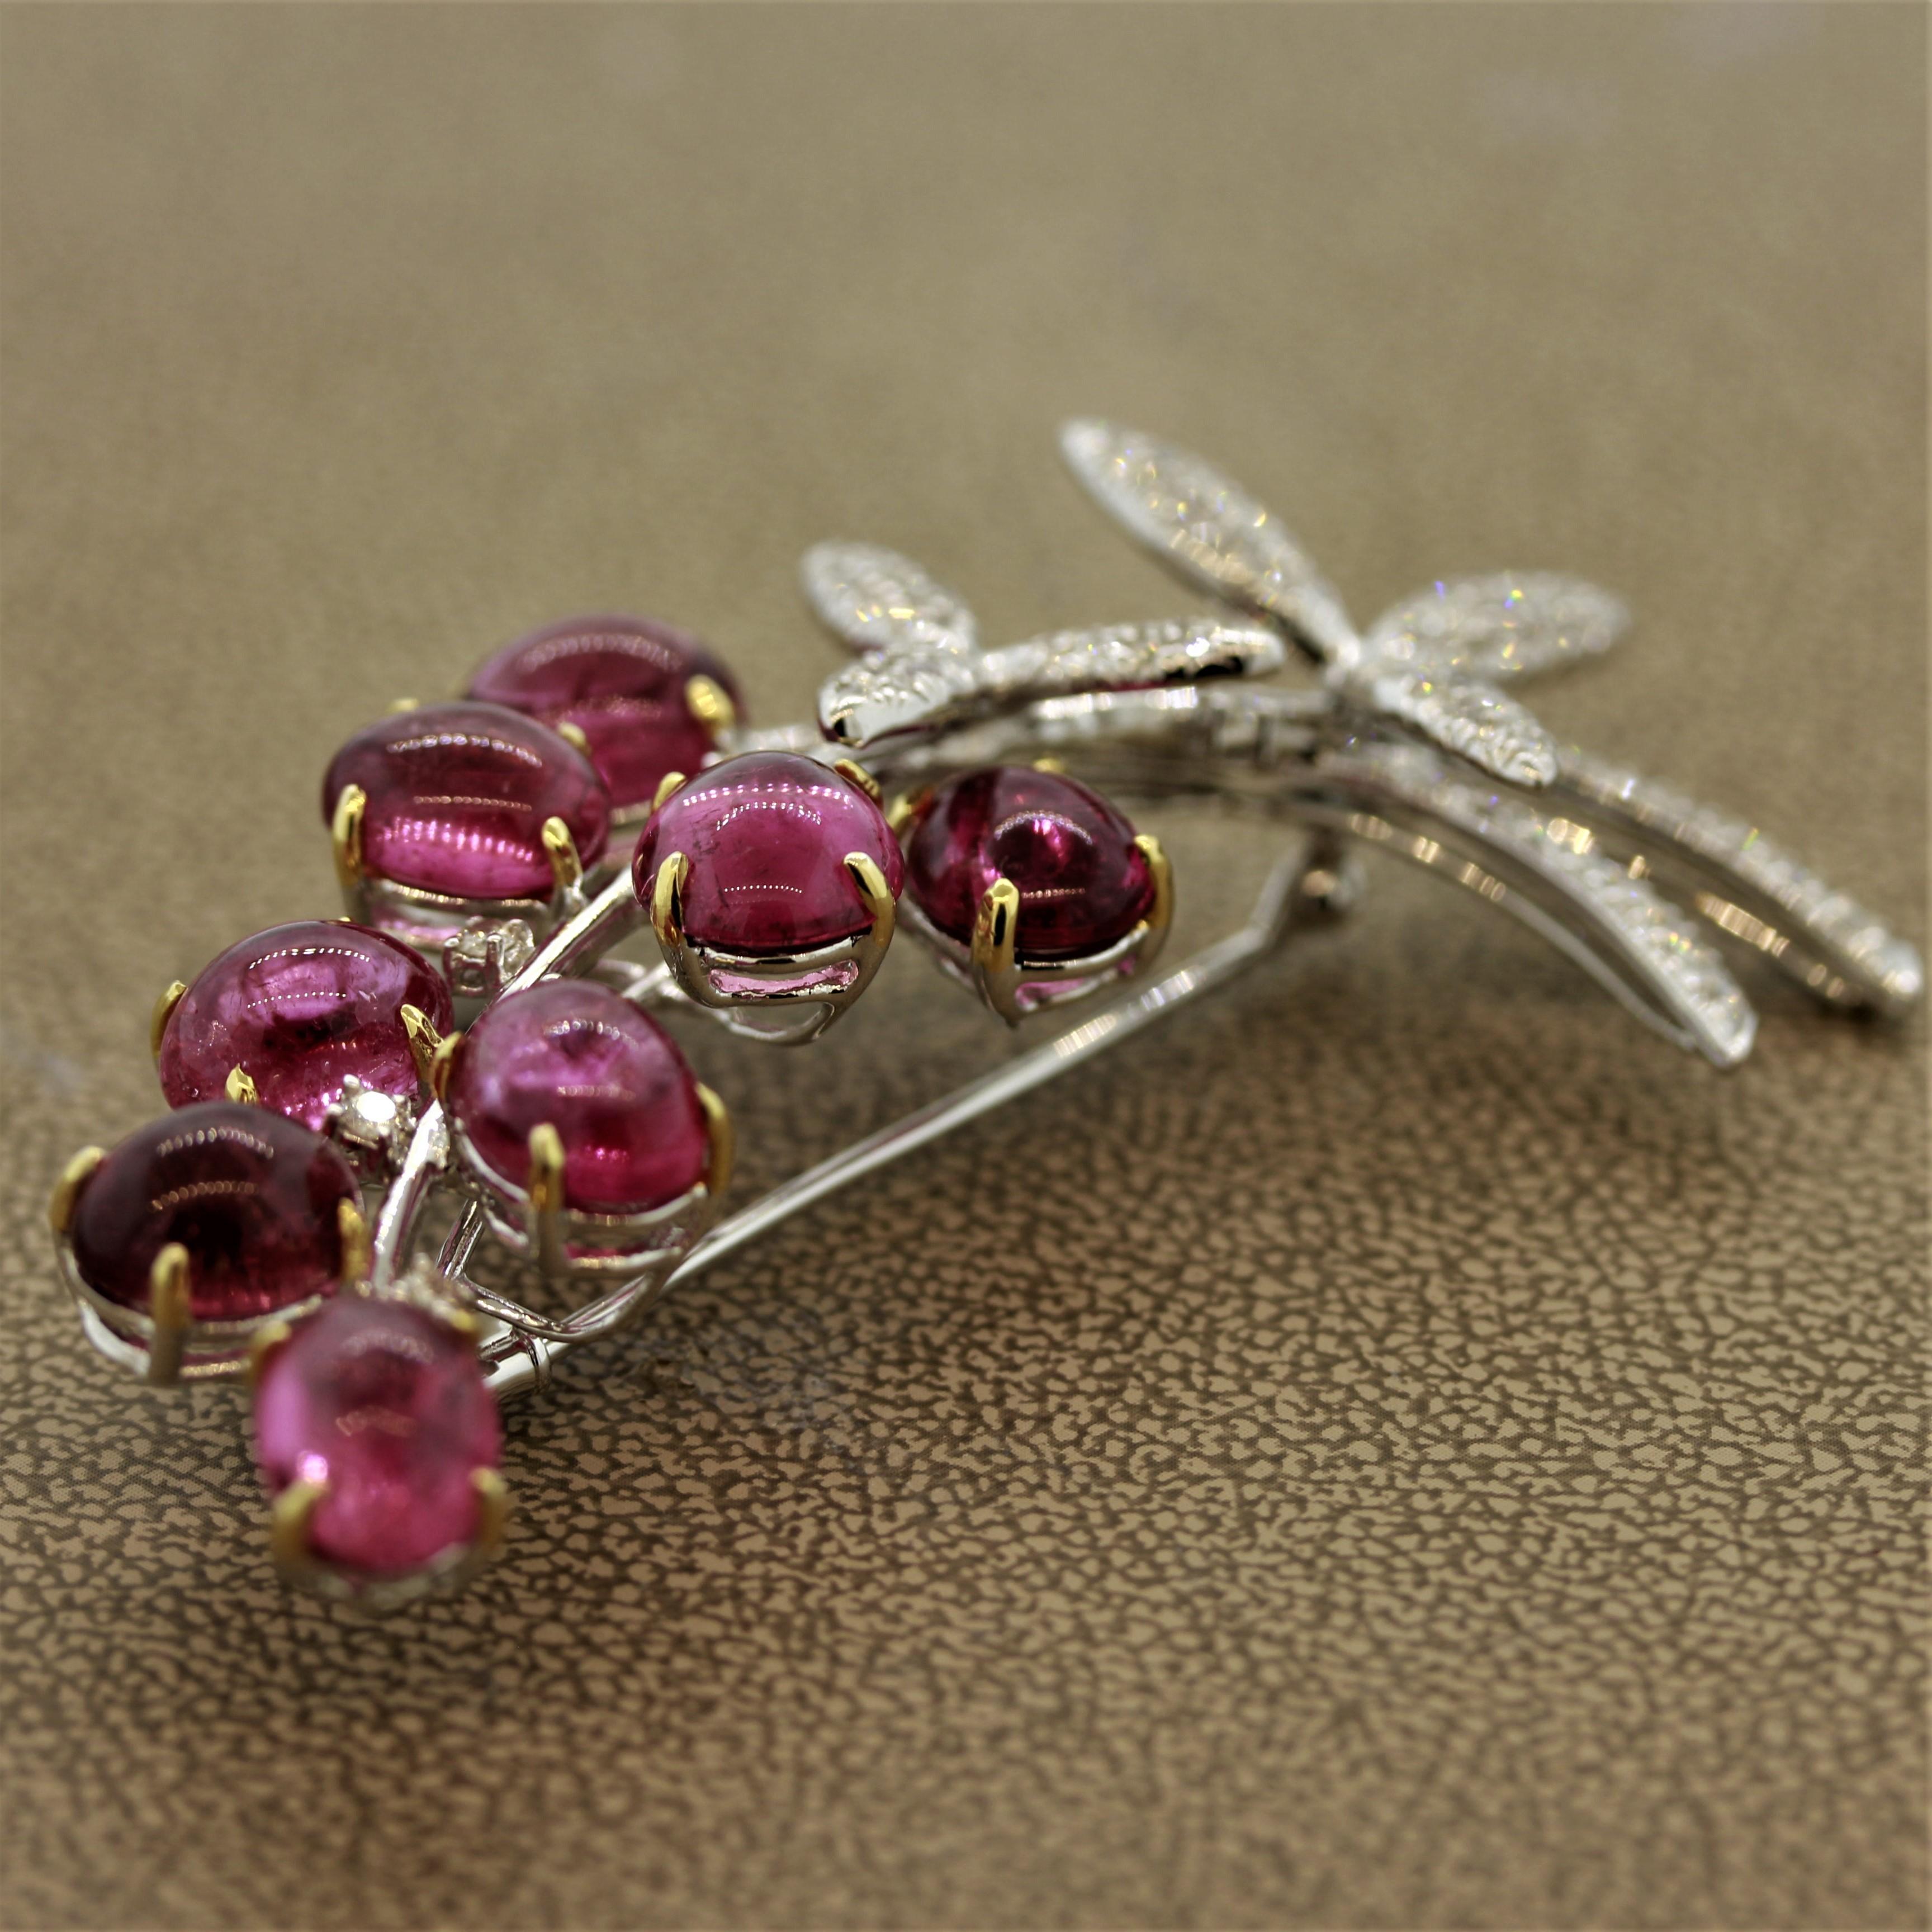 Tourmaline Cabochon “Berries” Diamond Gold Brooch For Sale 2